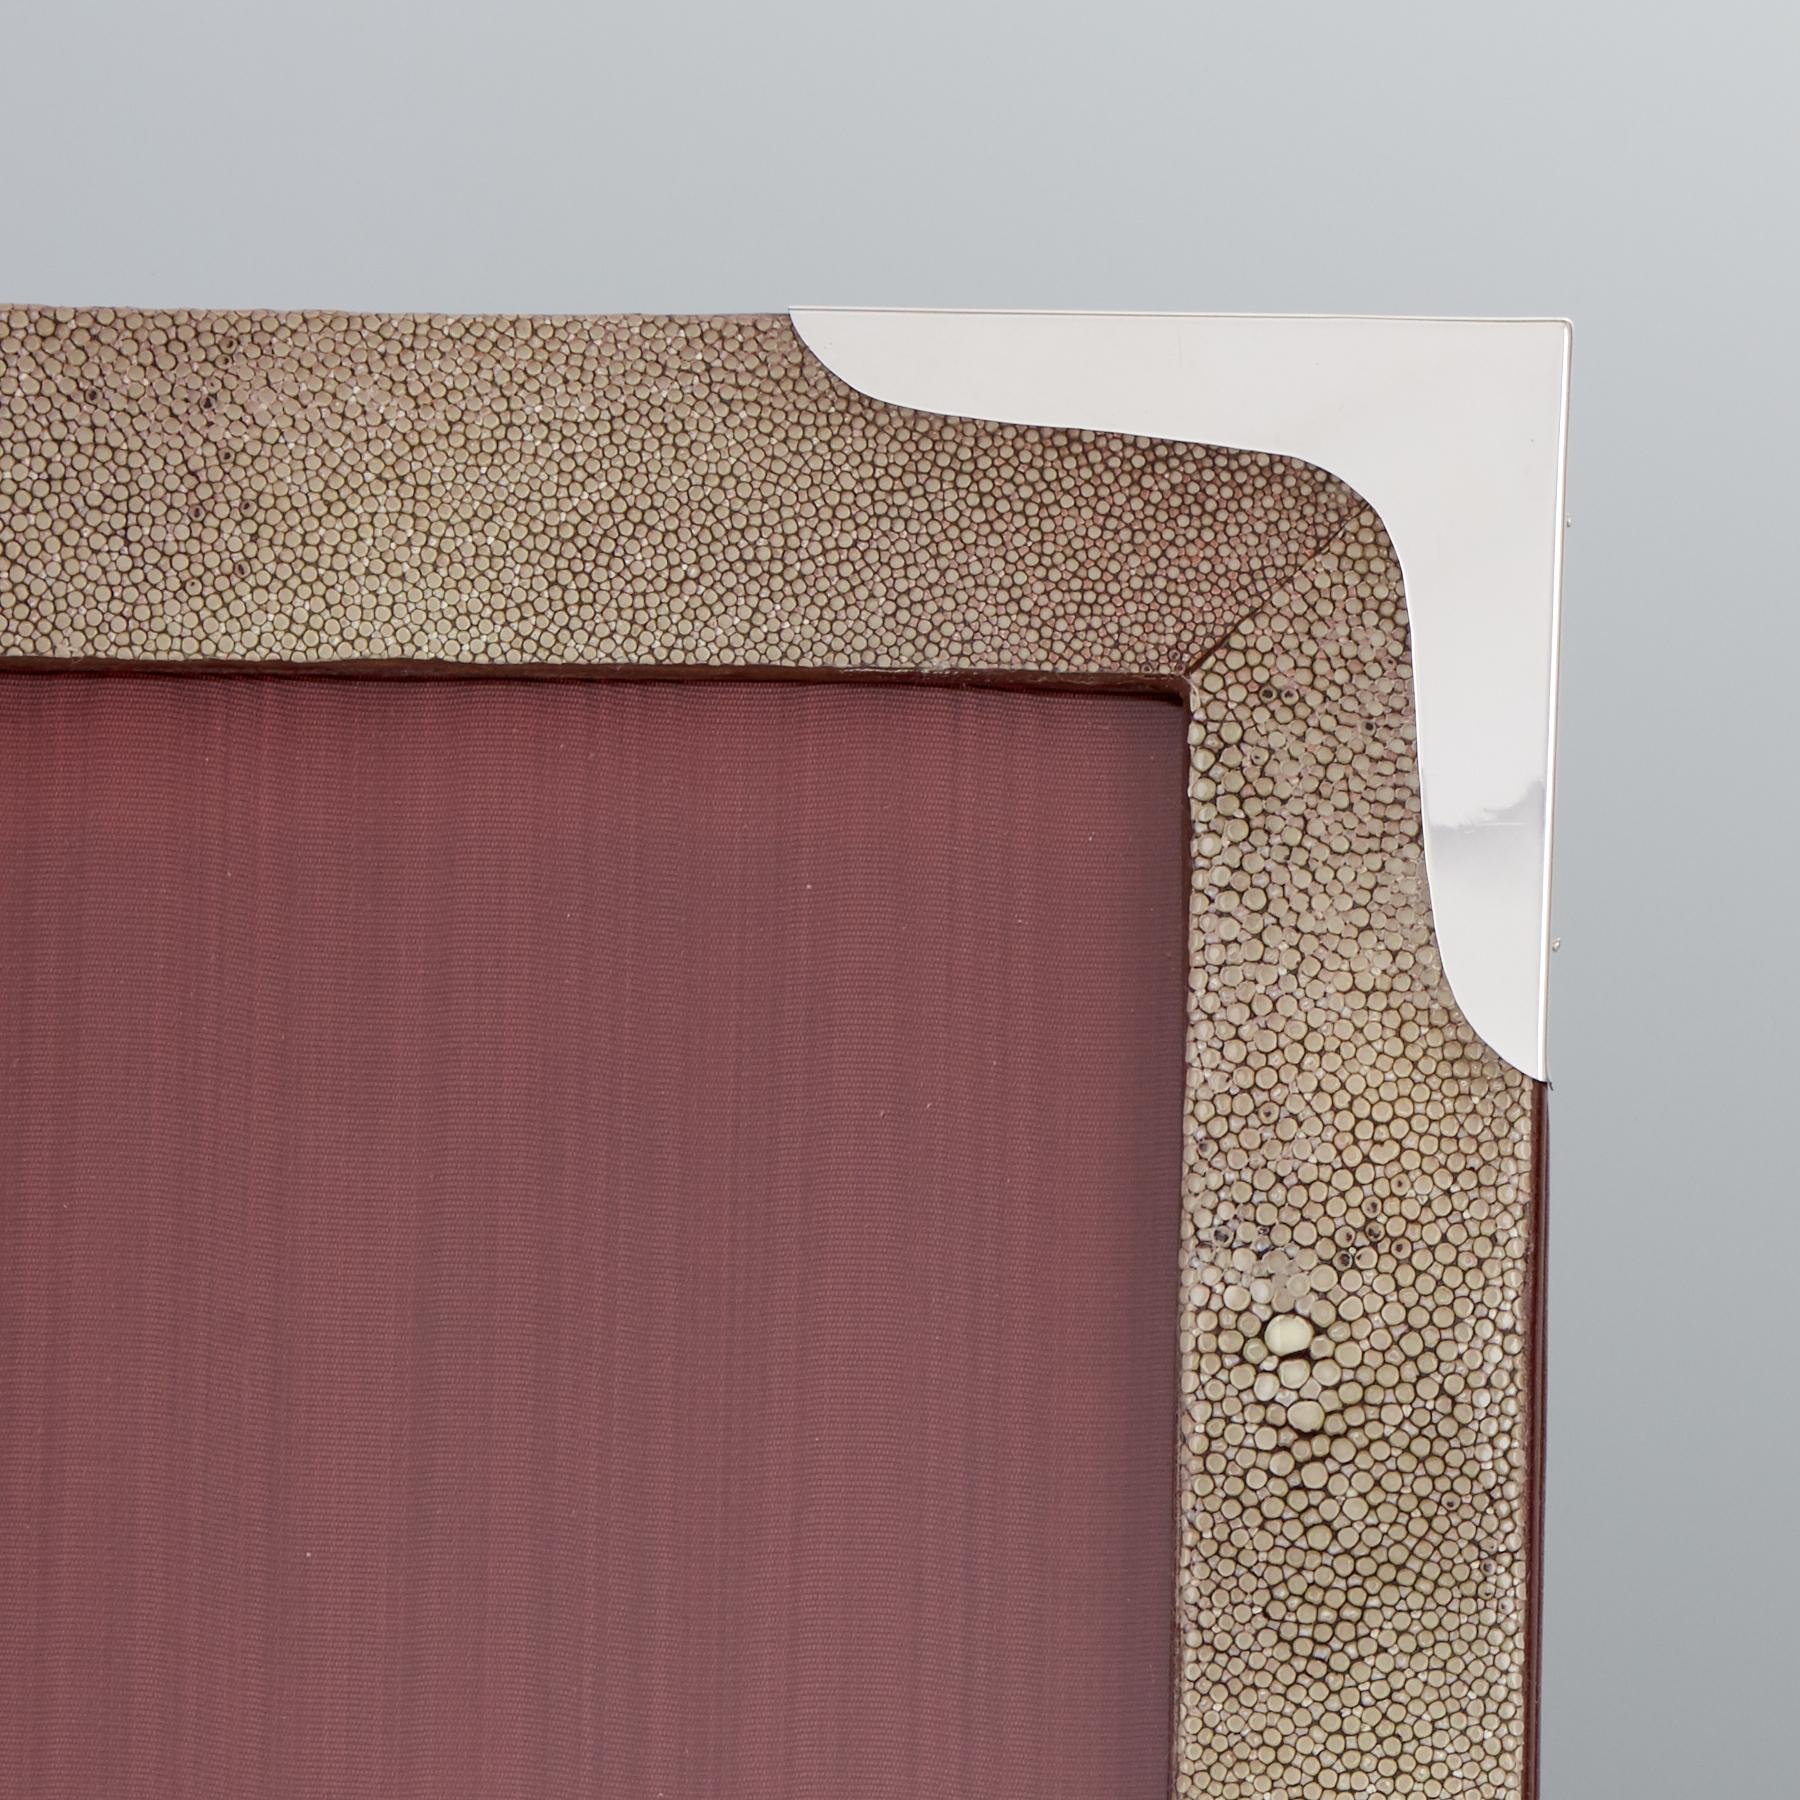 A pair of large mid-20th century shagreen photo frames with silver corners circa 1960.
This great pair of shagreen frames in a beautiful muted taupe color the silver corners are unmarked.
The backs and easel supports are in morocco leather origin